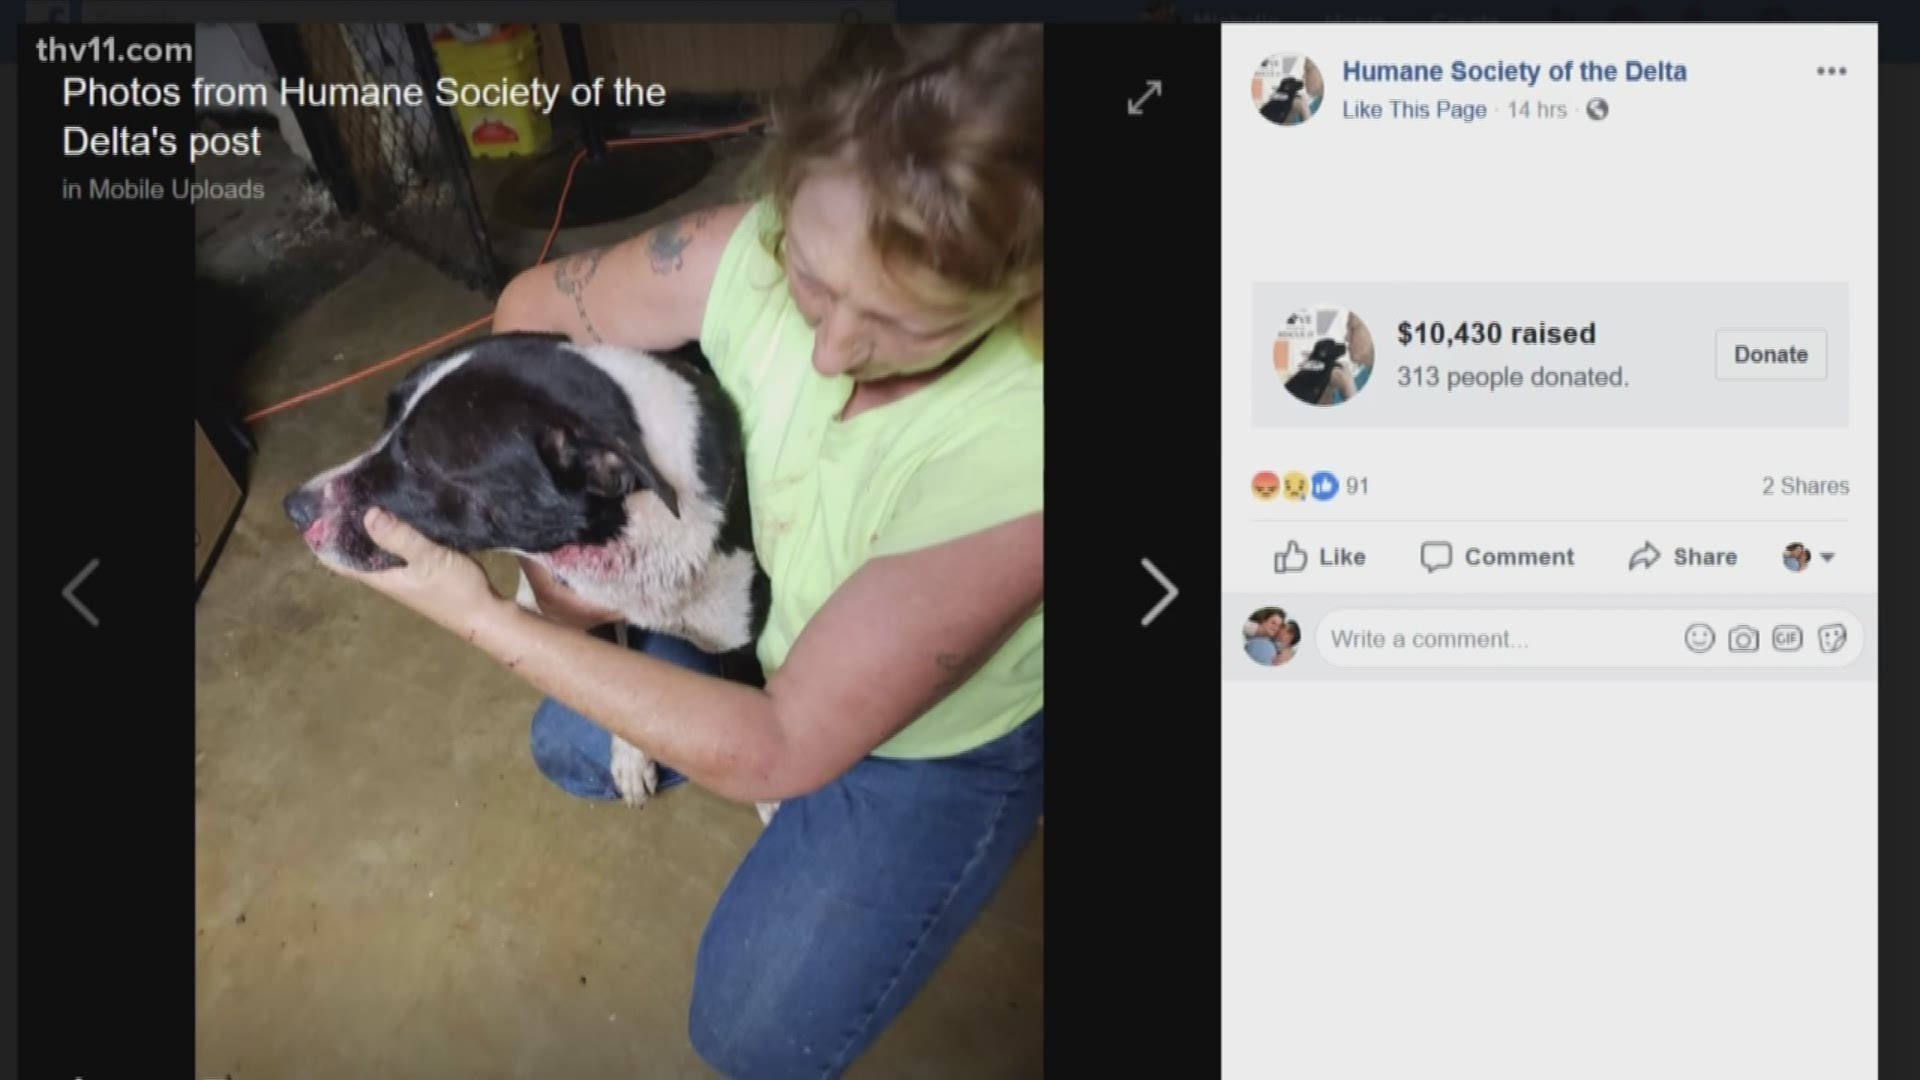 For the second time in two weeks - an animal shelter says someone has broken into their facility to use dogs there for dogfighting.